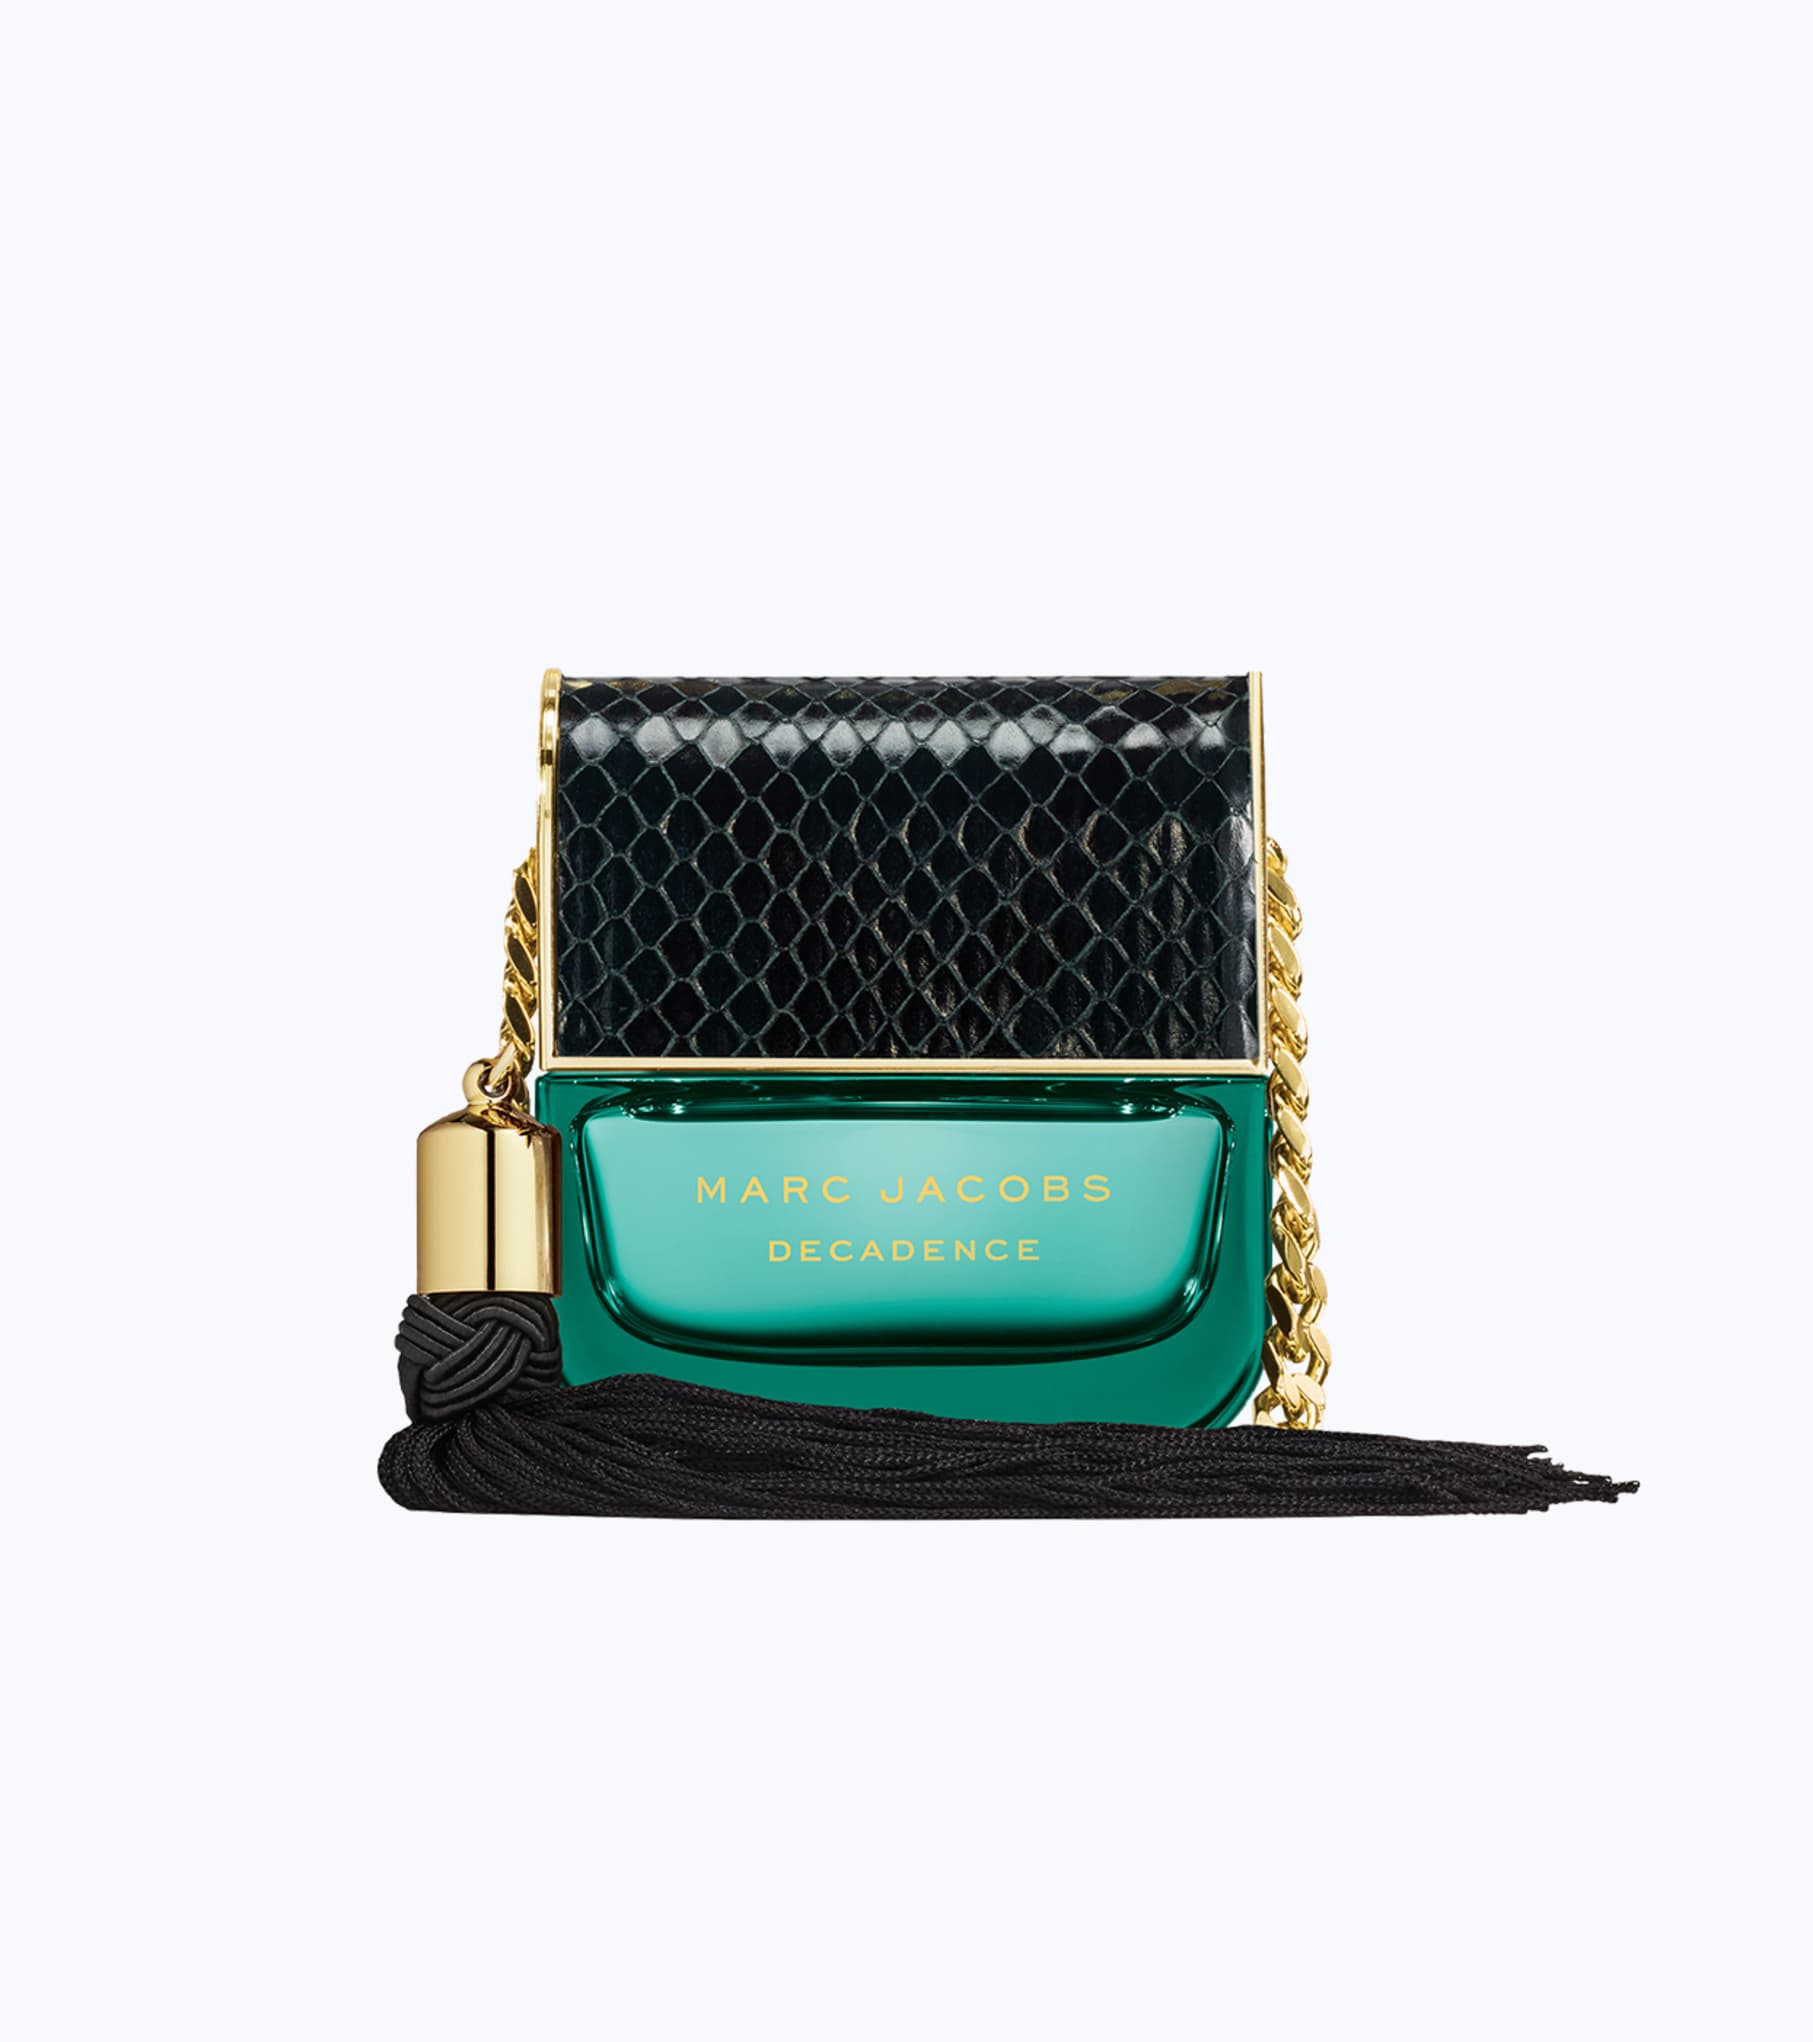 marc jacobs decadence notes